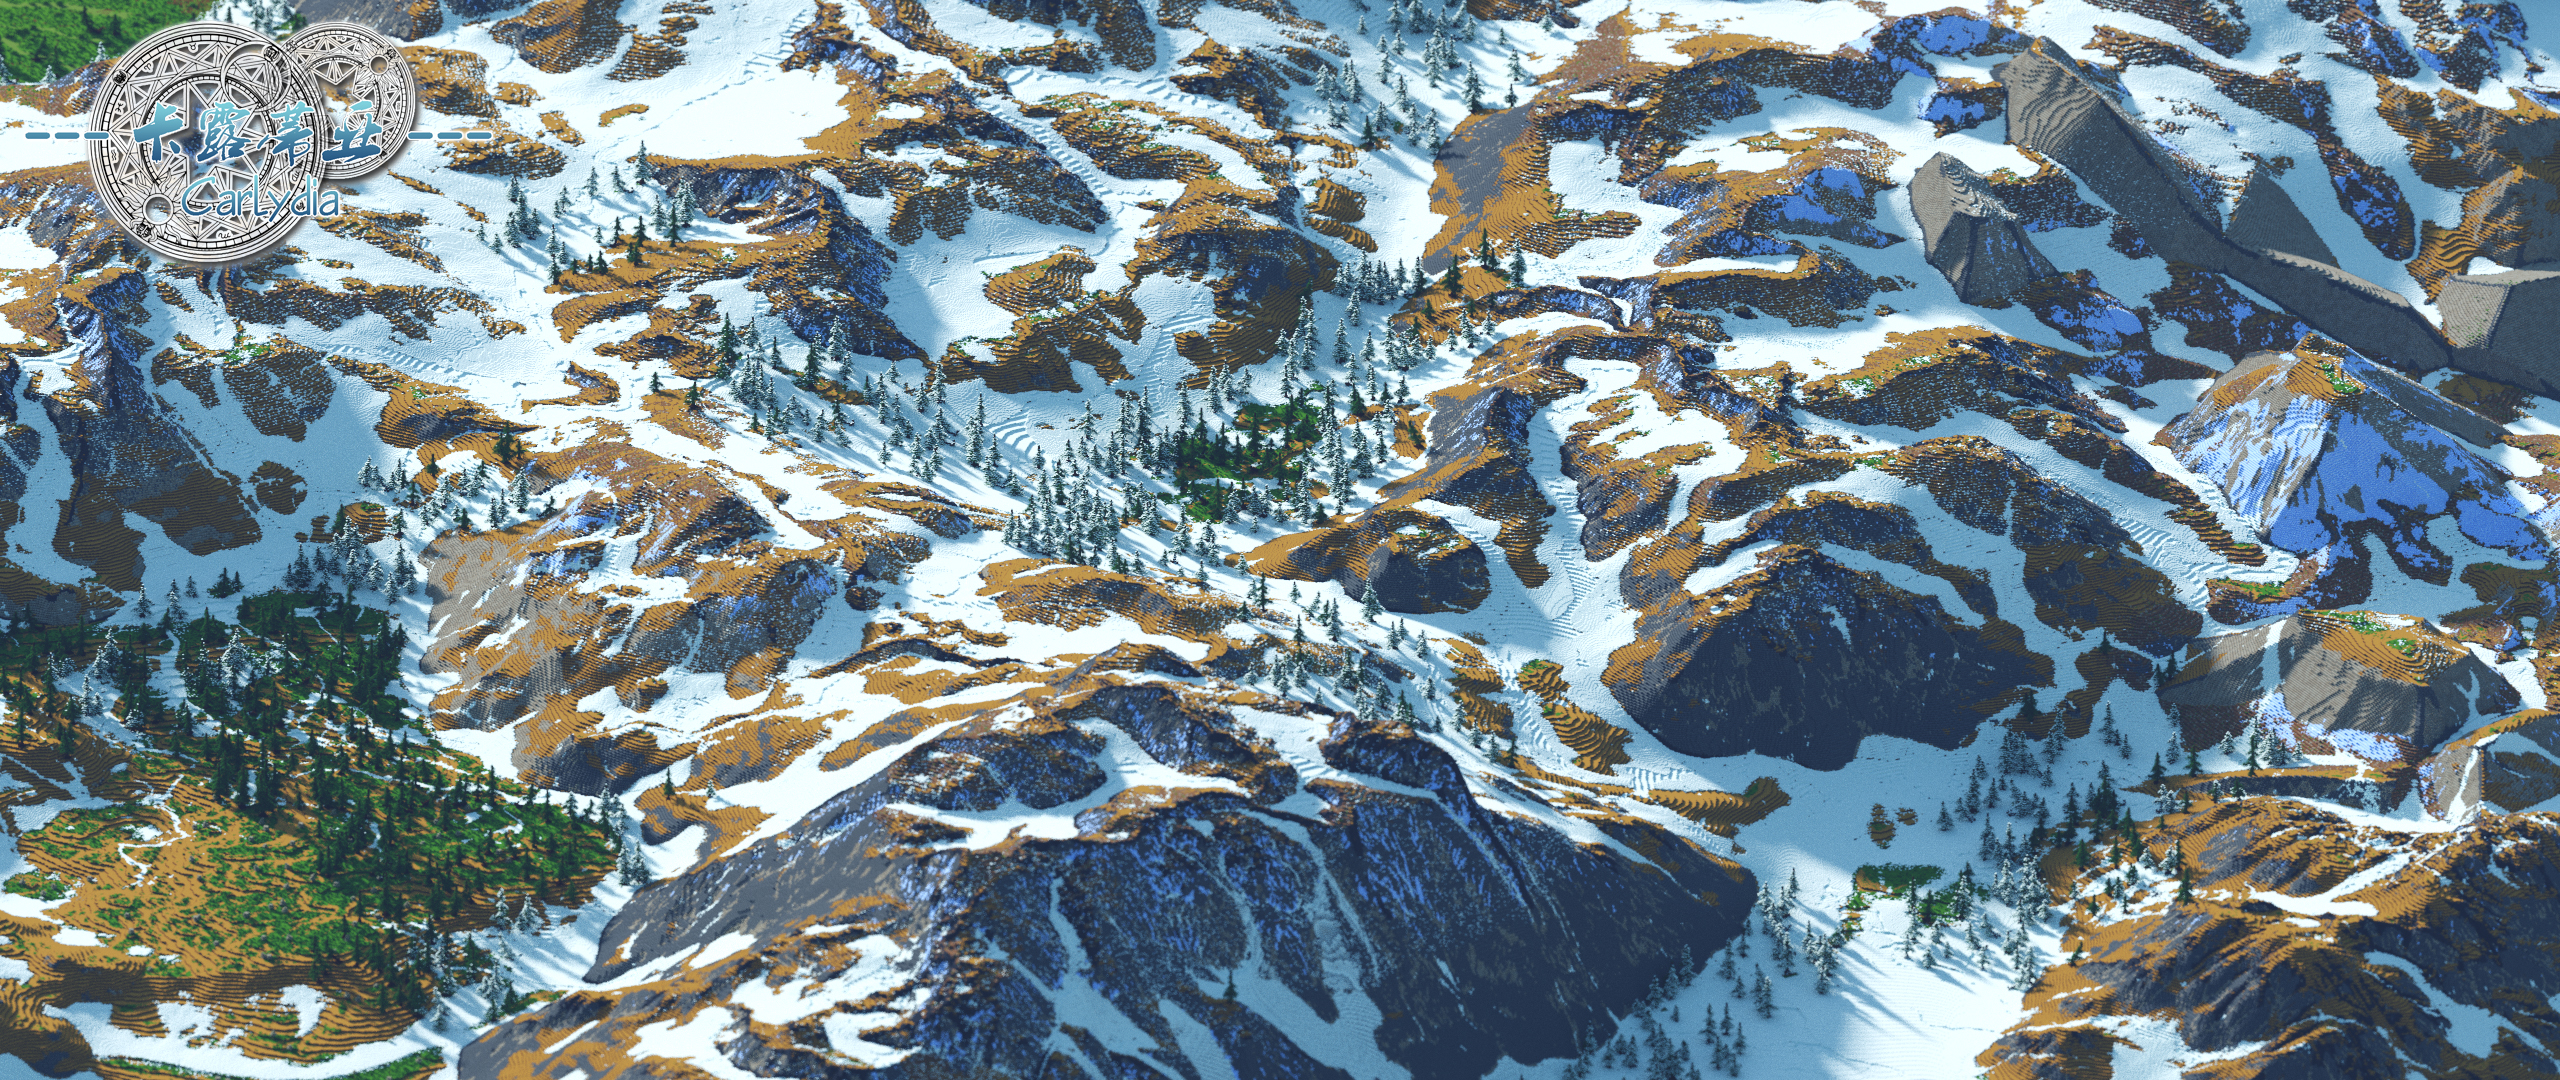 Great northern hills with sparse taiga forests